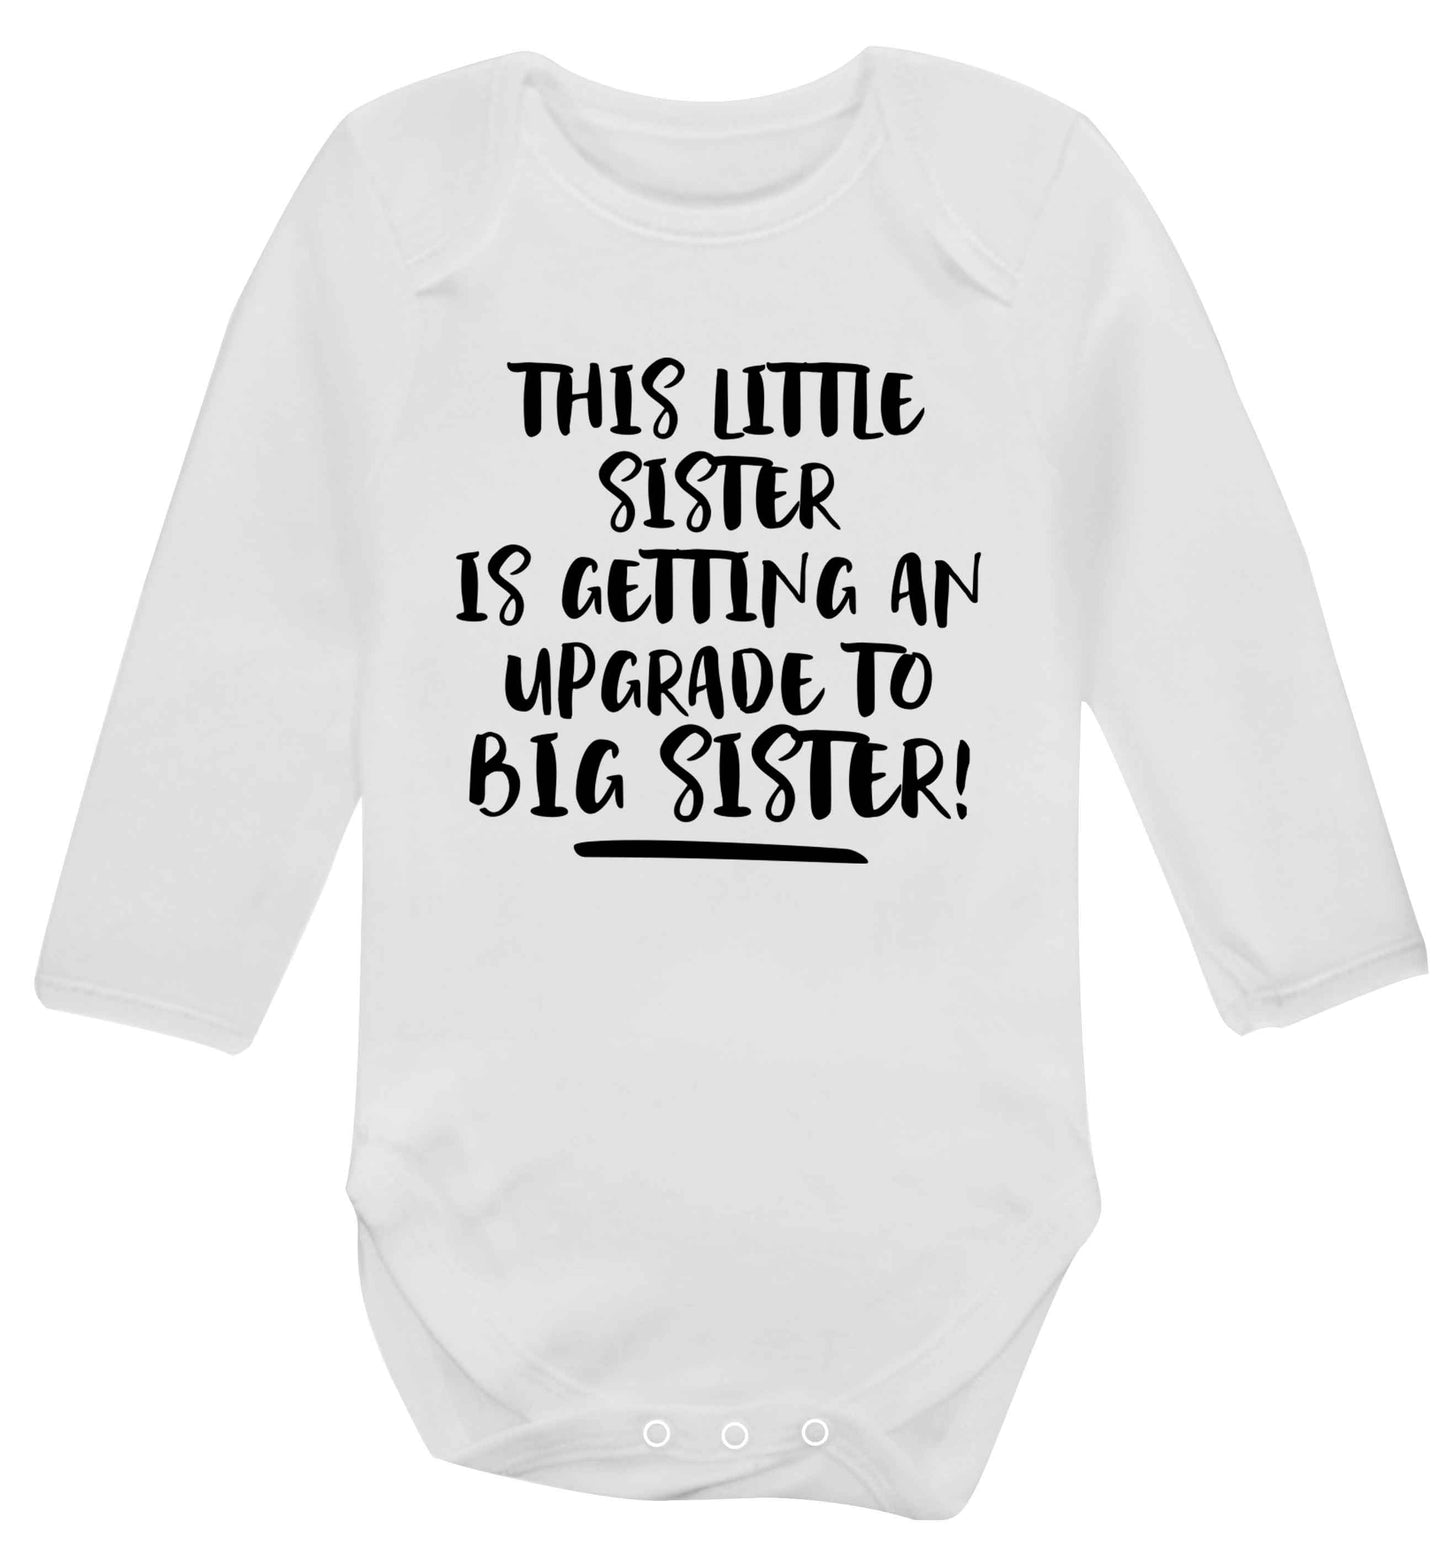 This little sister is getting an upgrade to big sister! Baby Vest long sleeved white 6-12 months